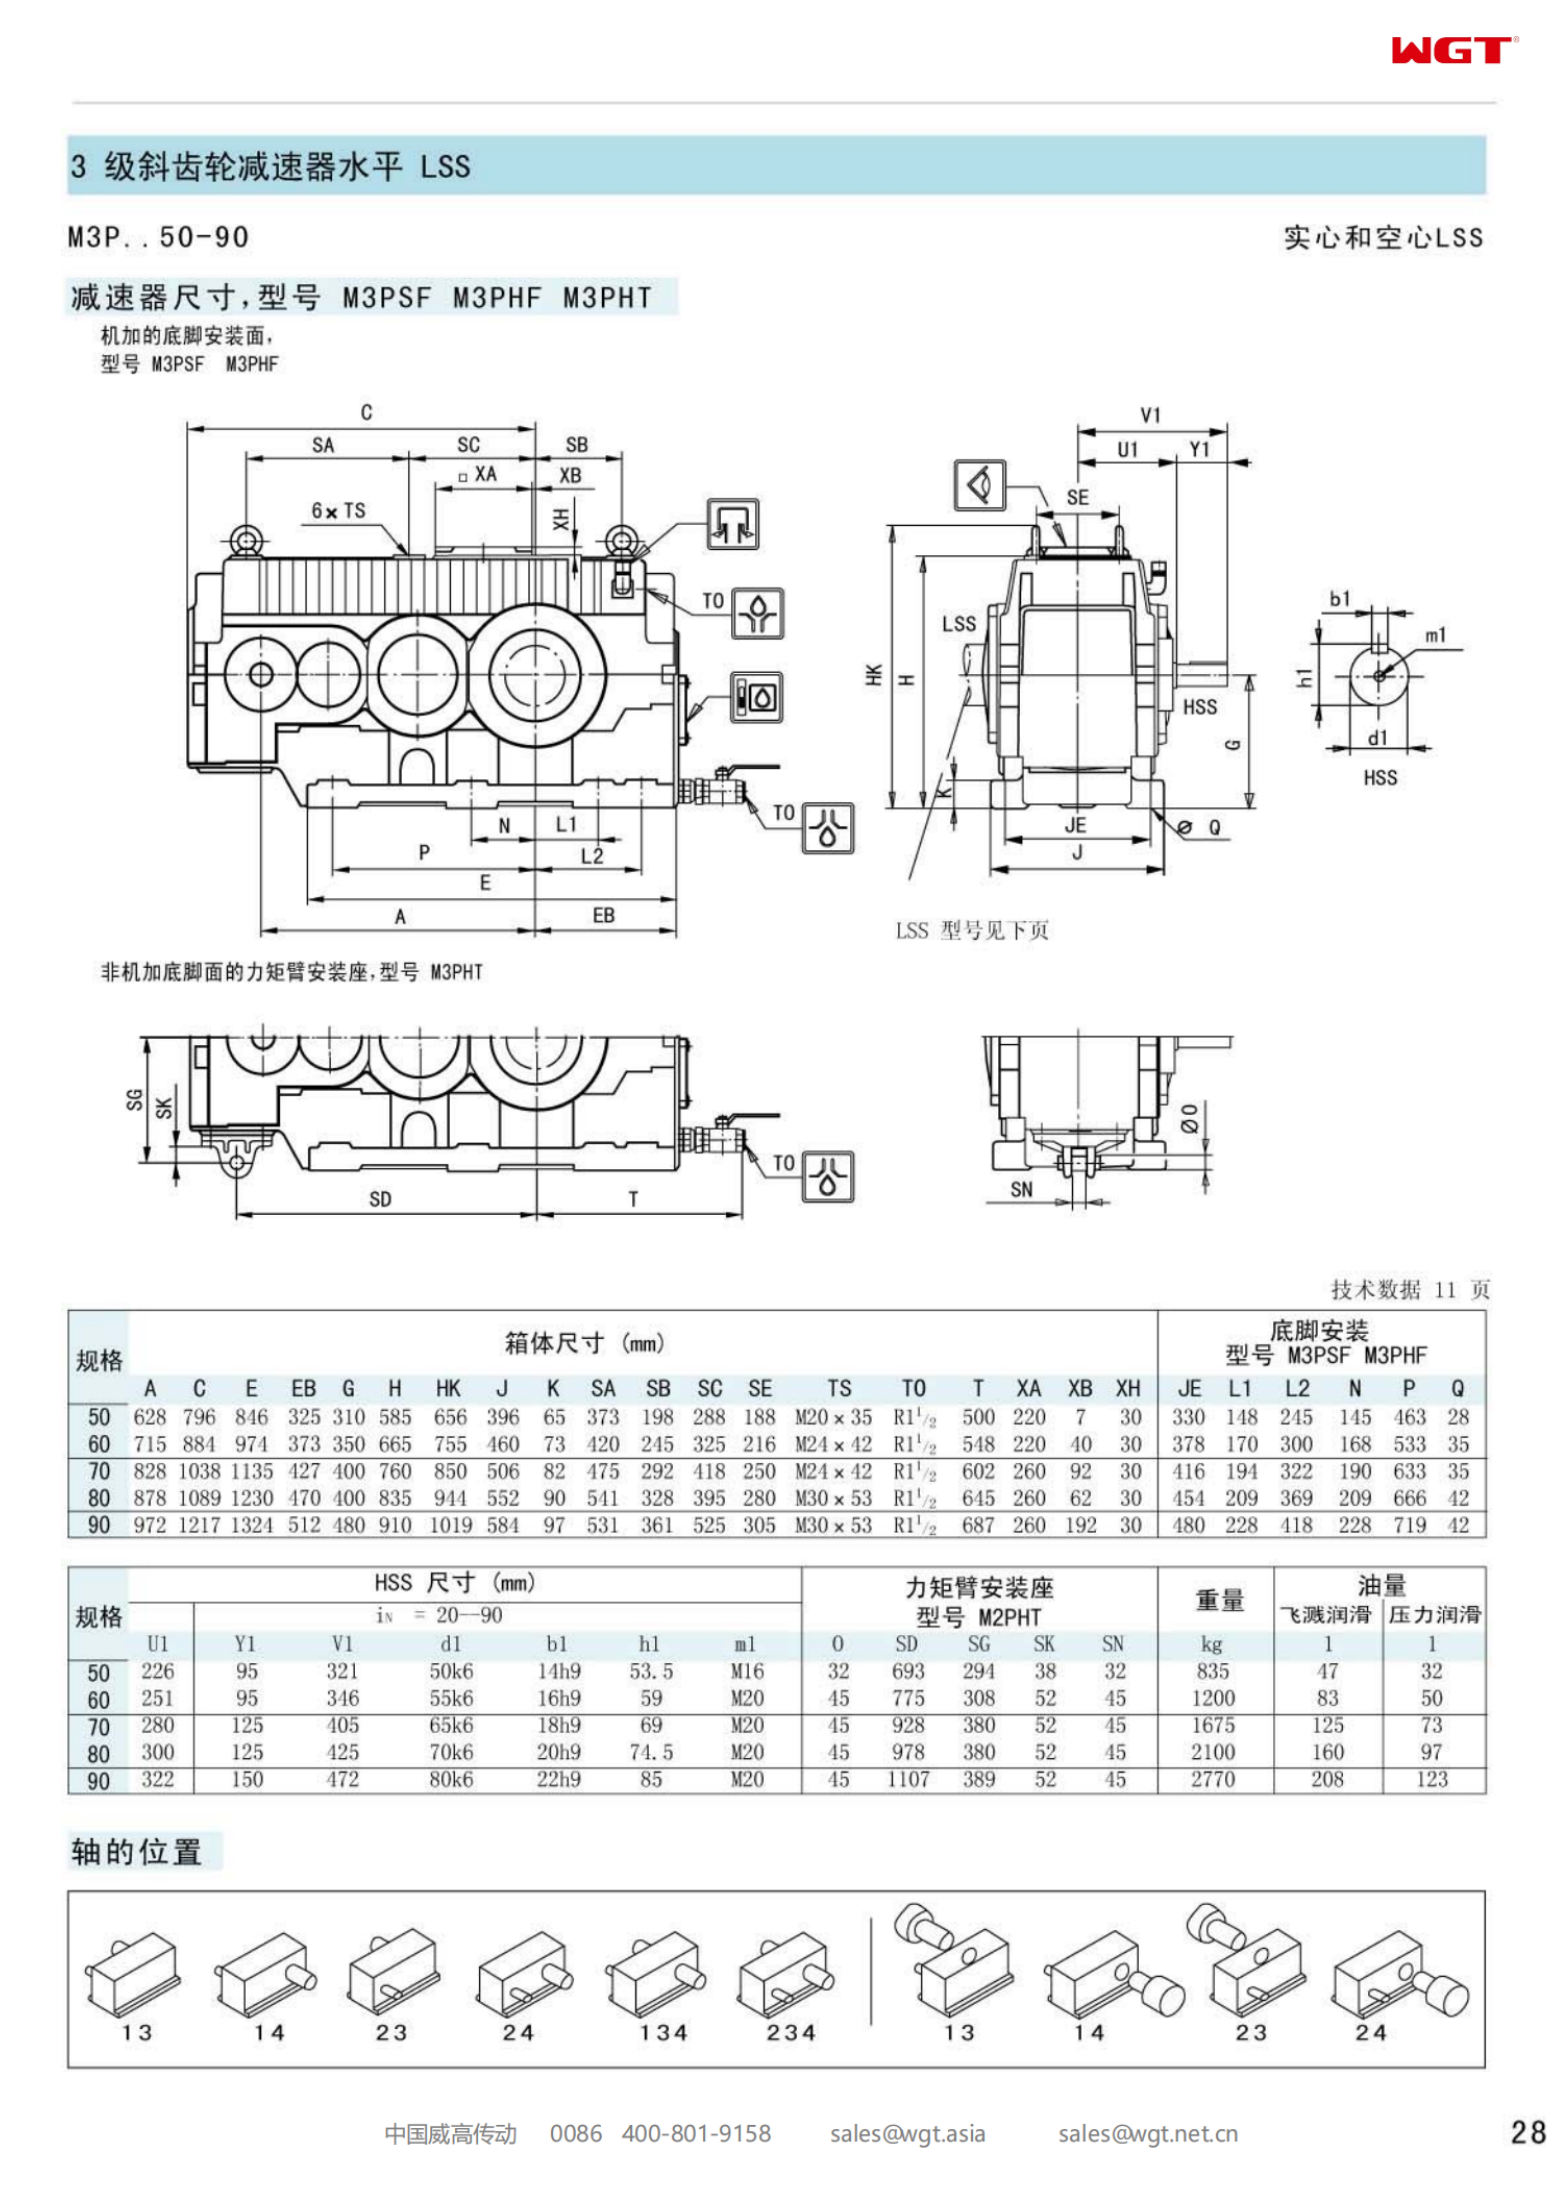 M3PHF50 Replace_SEW_M_Series Gearbox